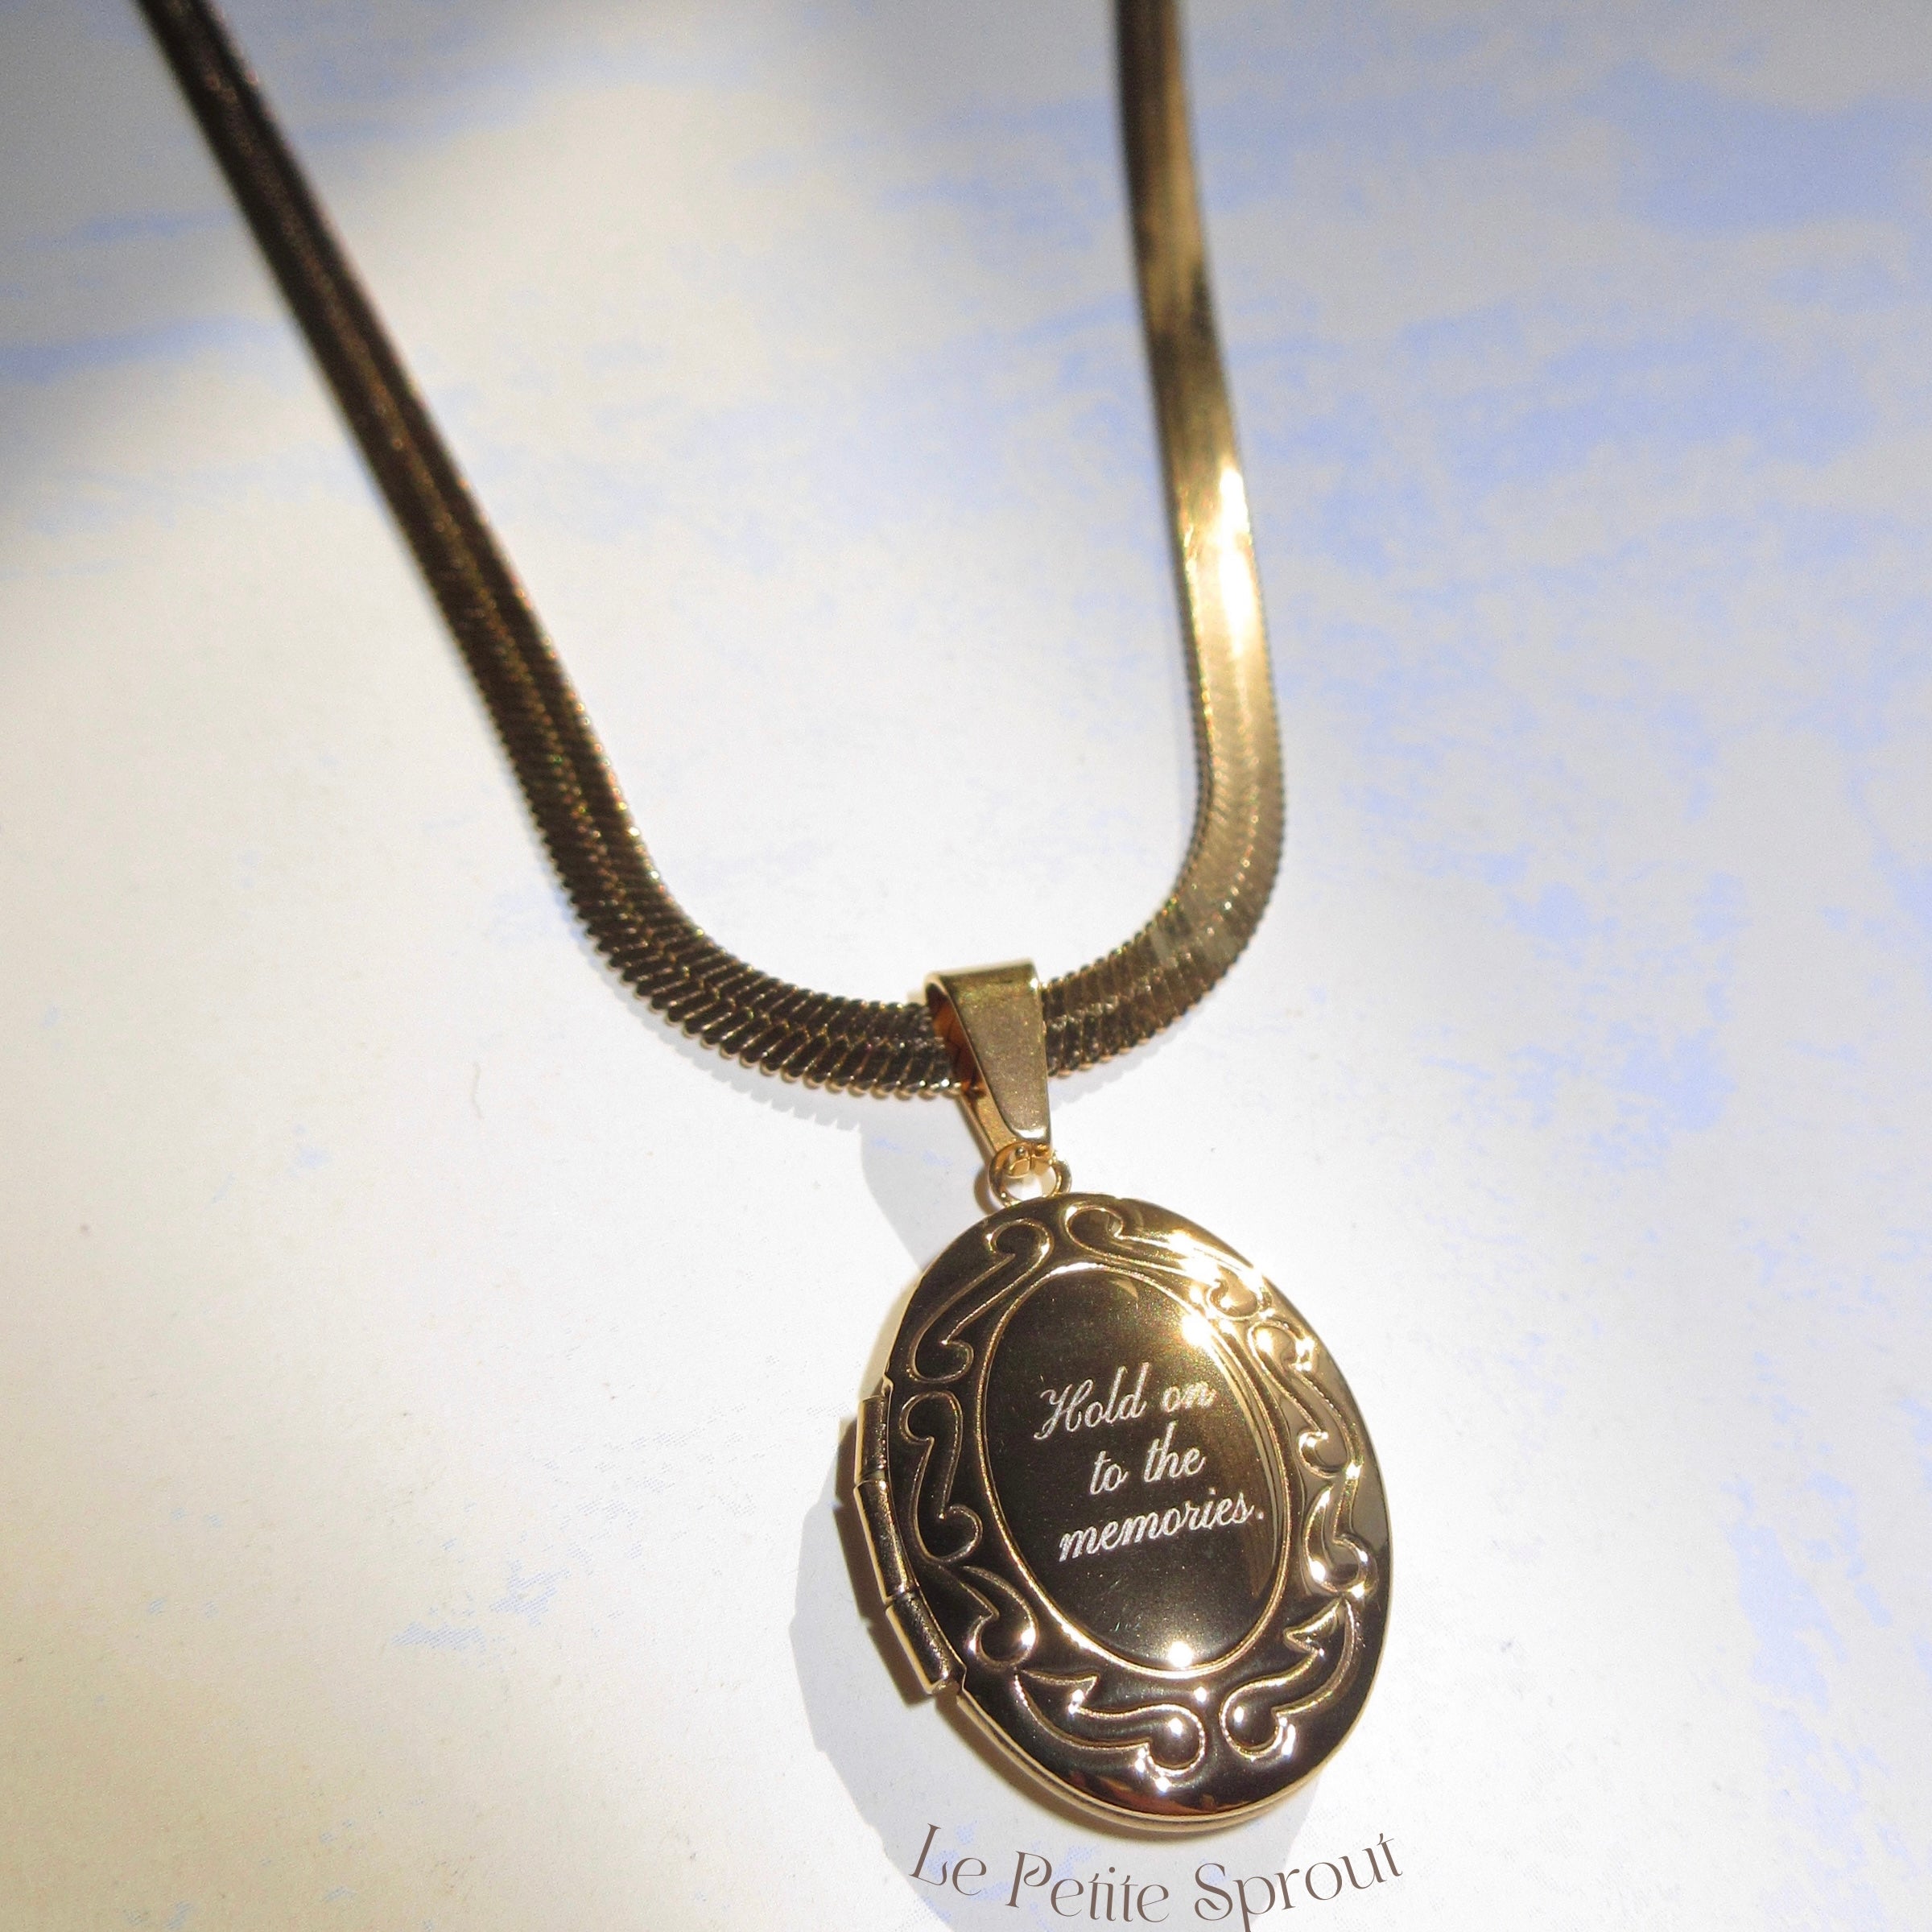 Hold on to Memories Locket Necklace